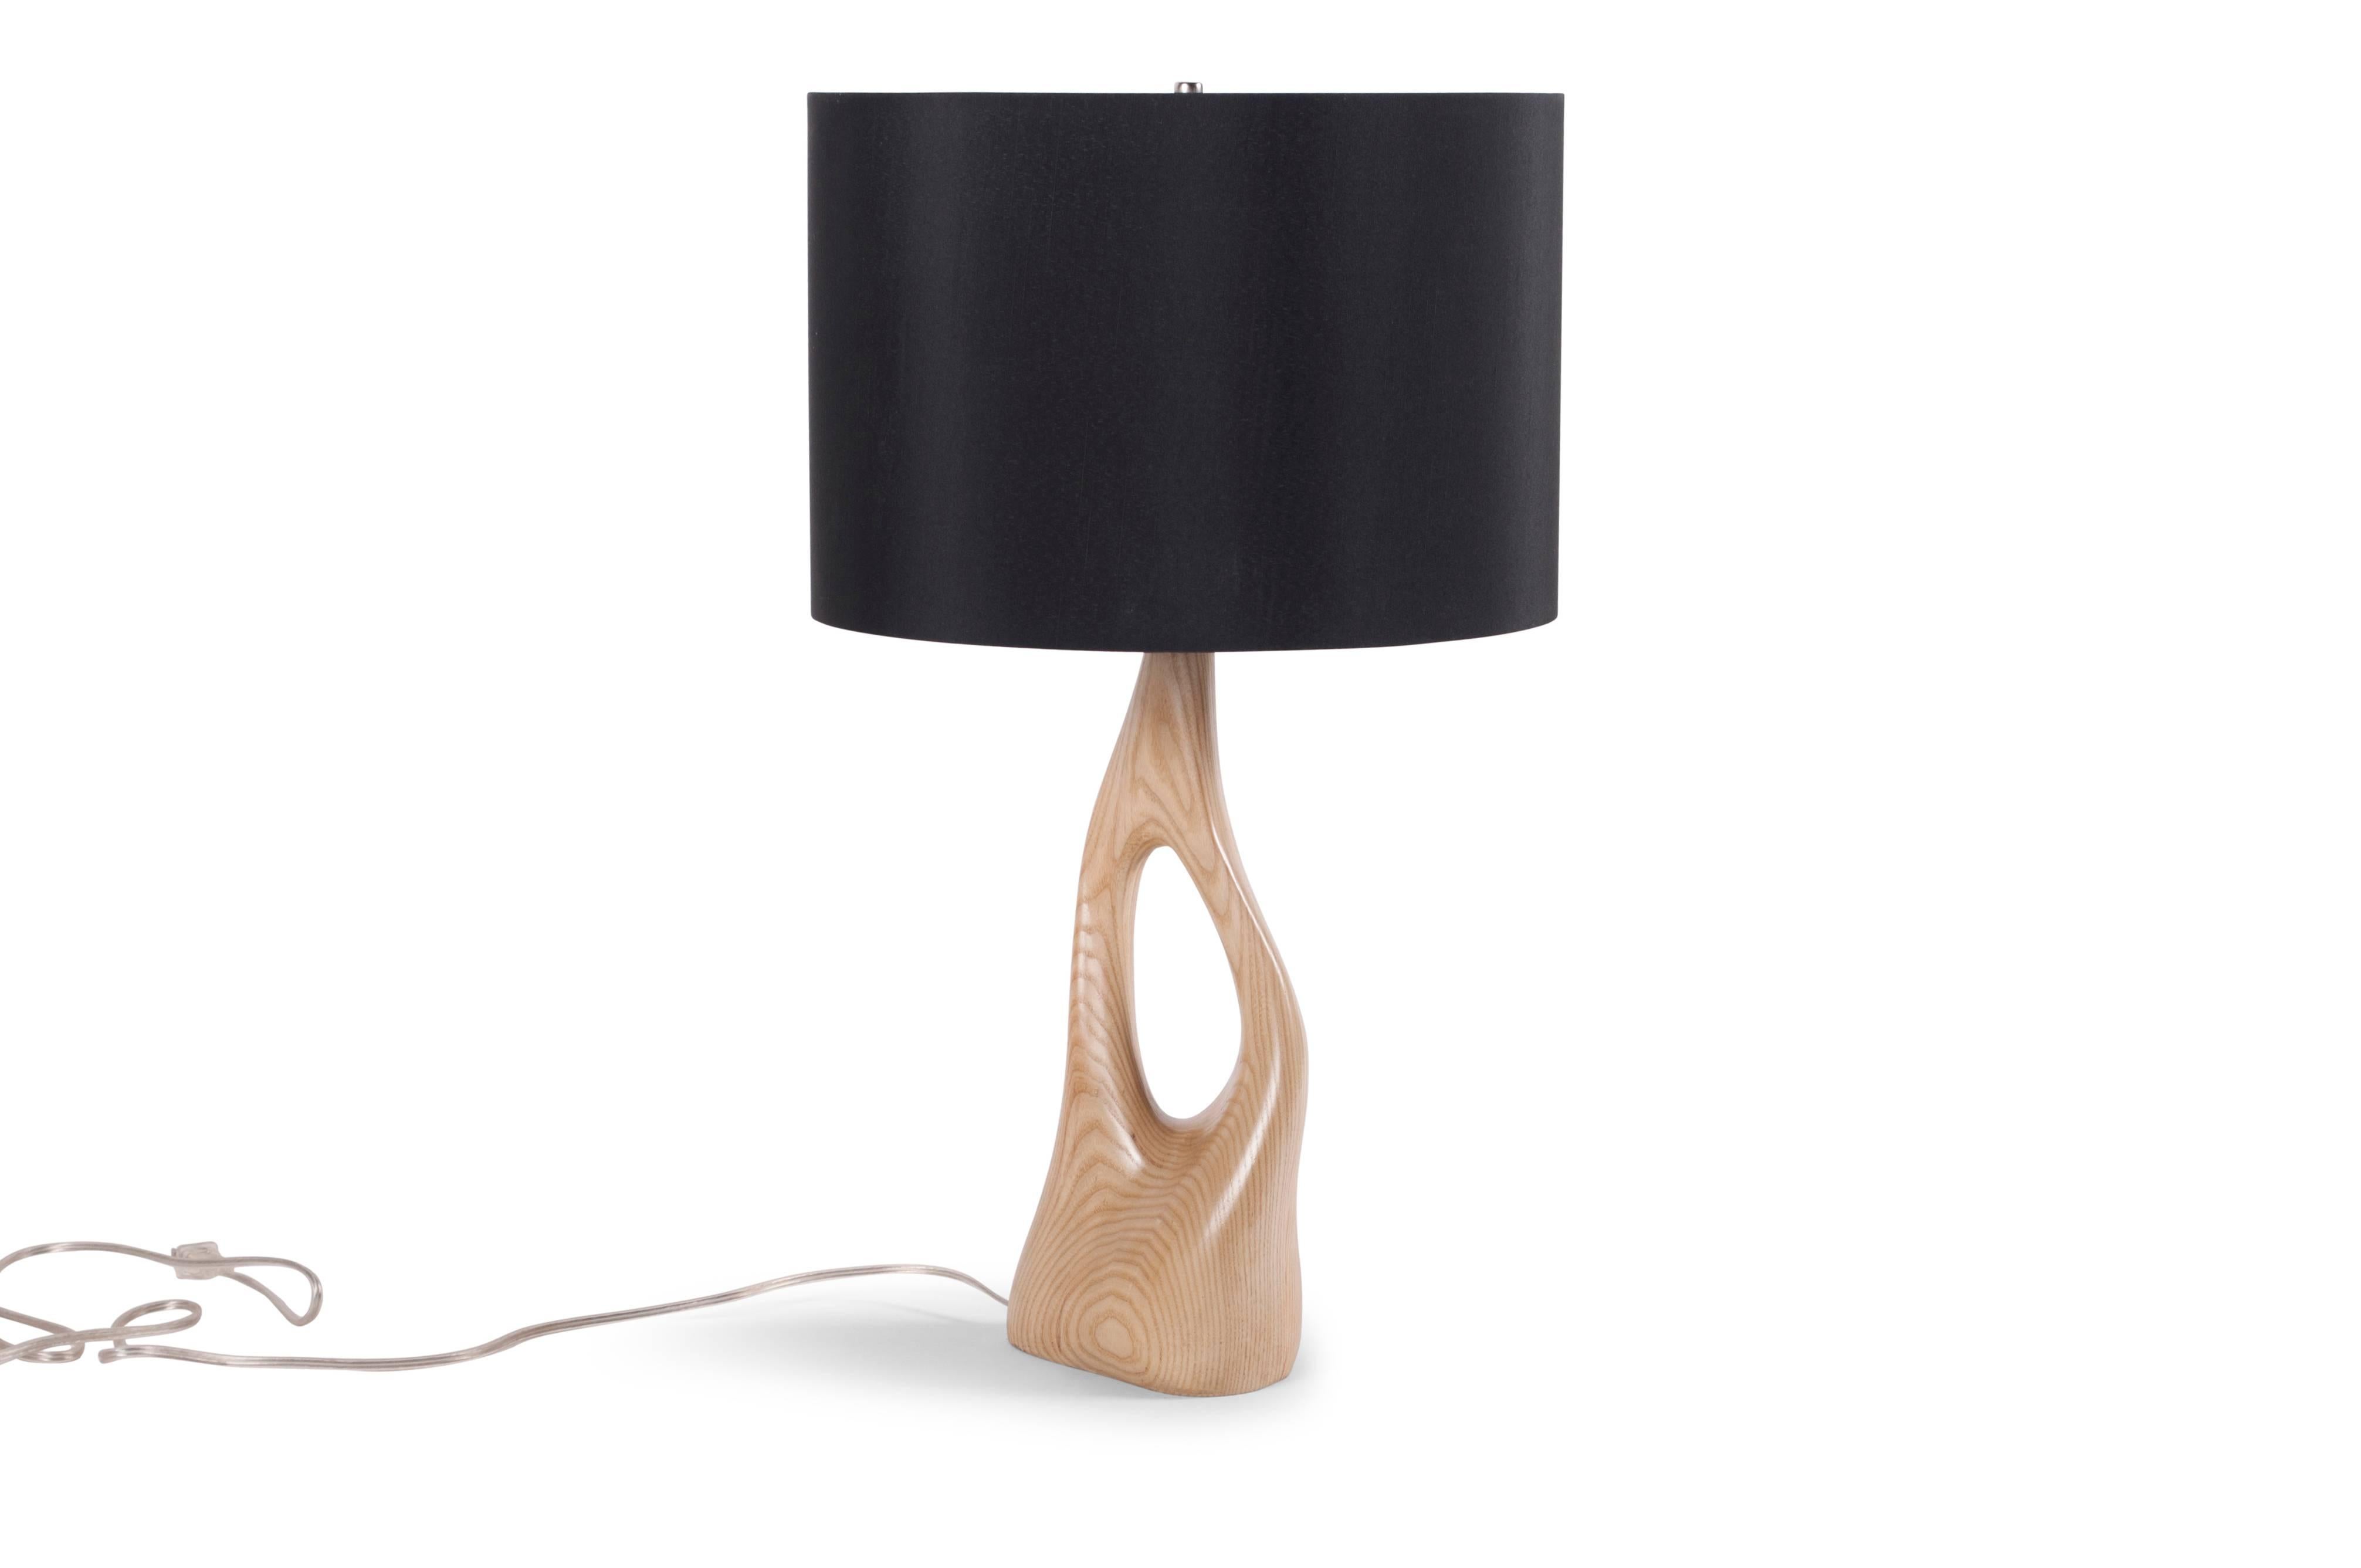 Table Lamp designed by Amorph made out of solid ash wood. Stain color: bleach and Natural Stained
Dimension base: 16